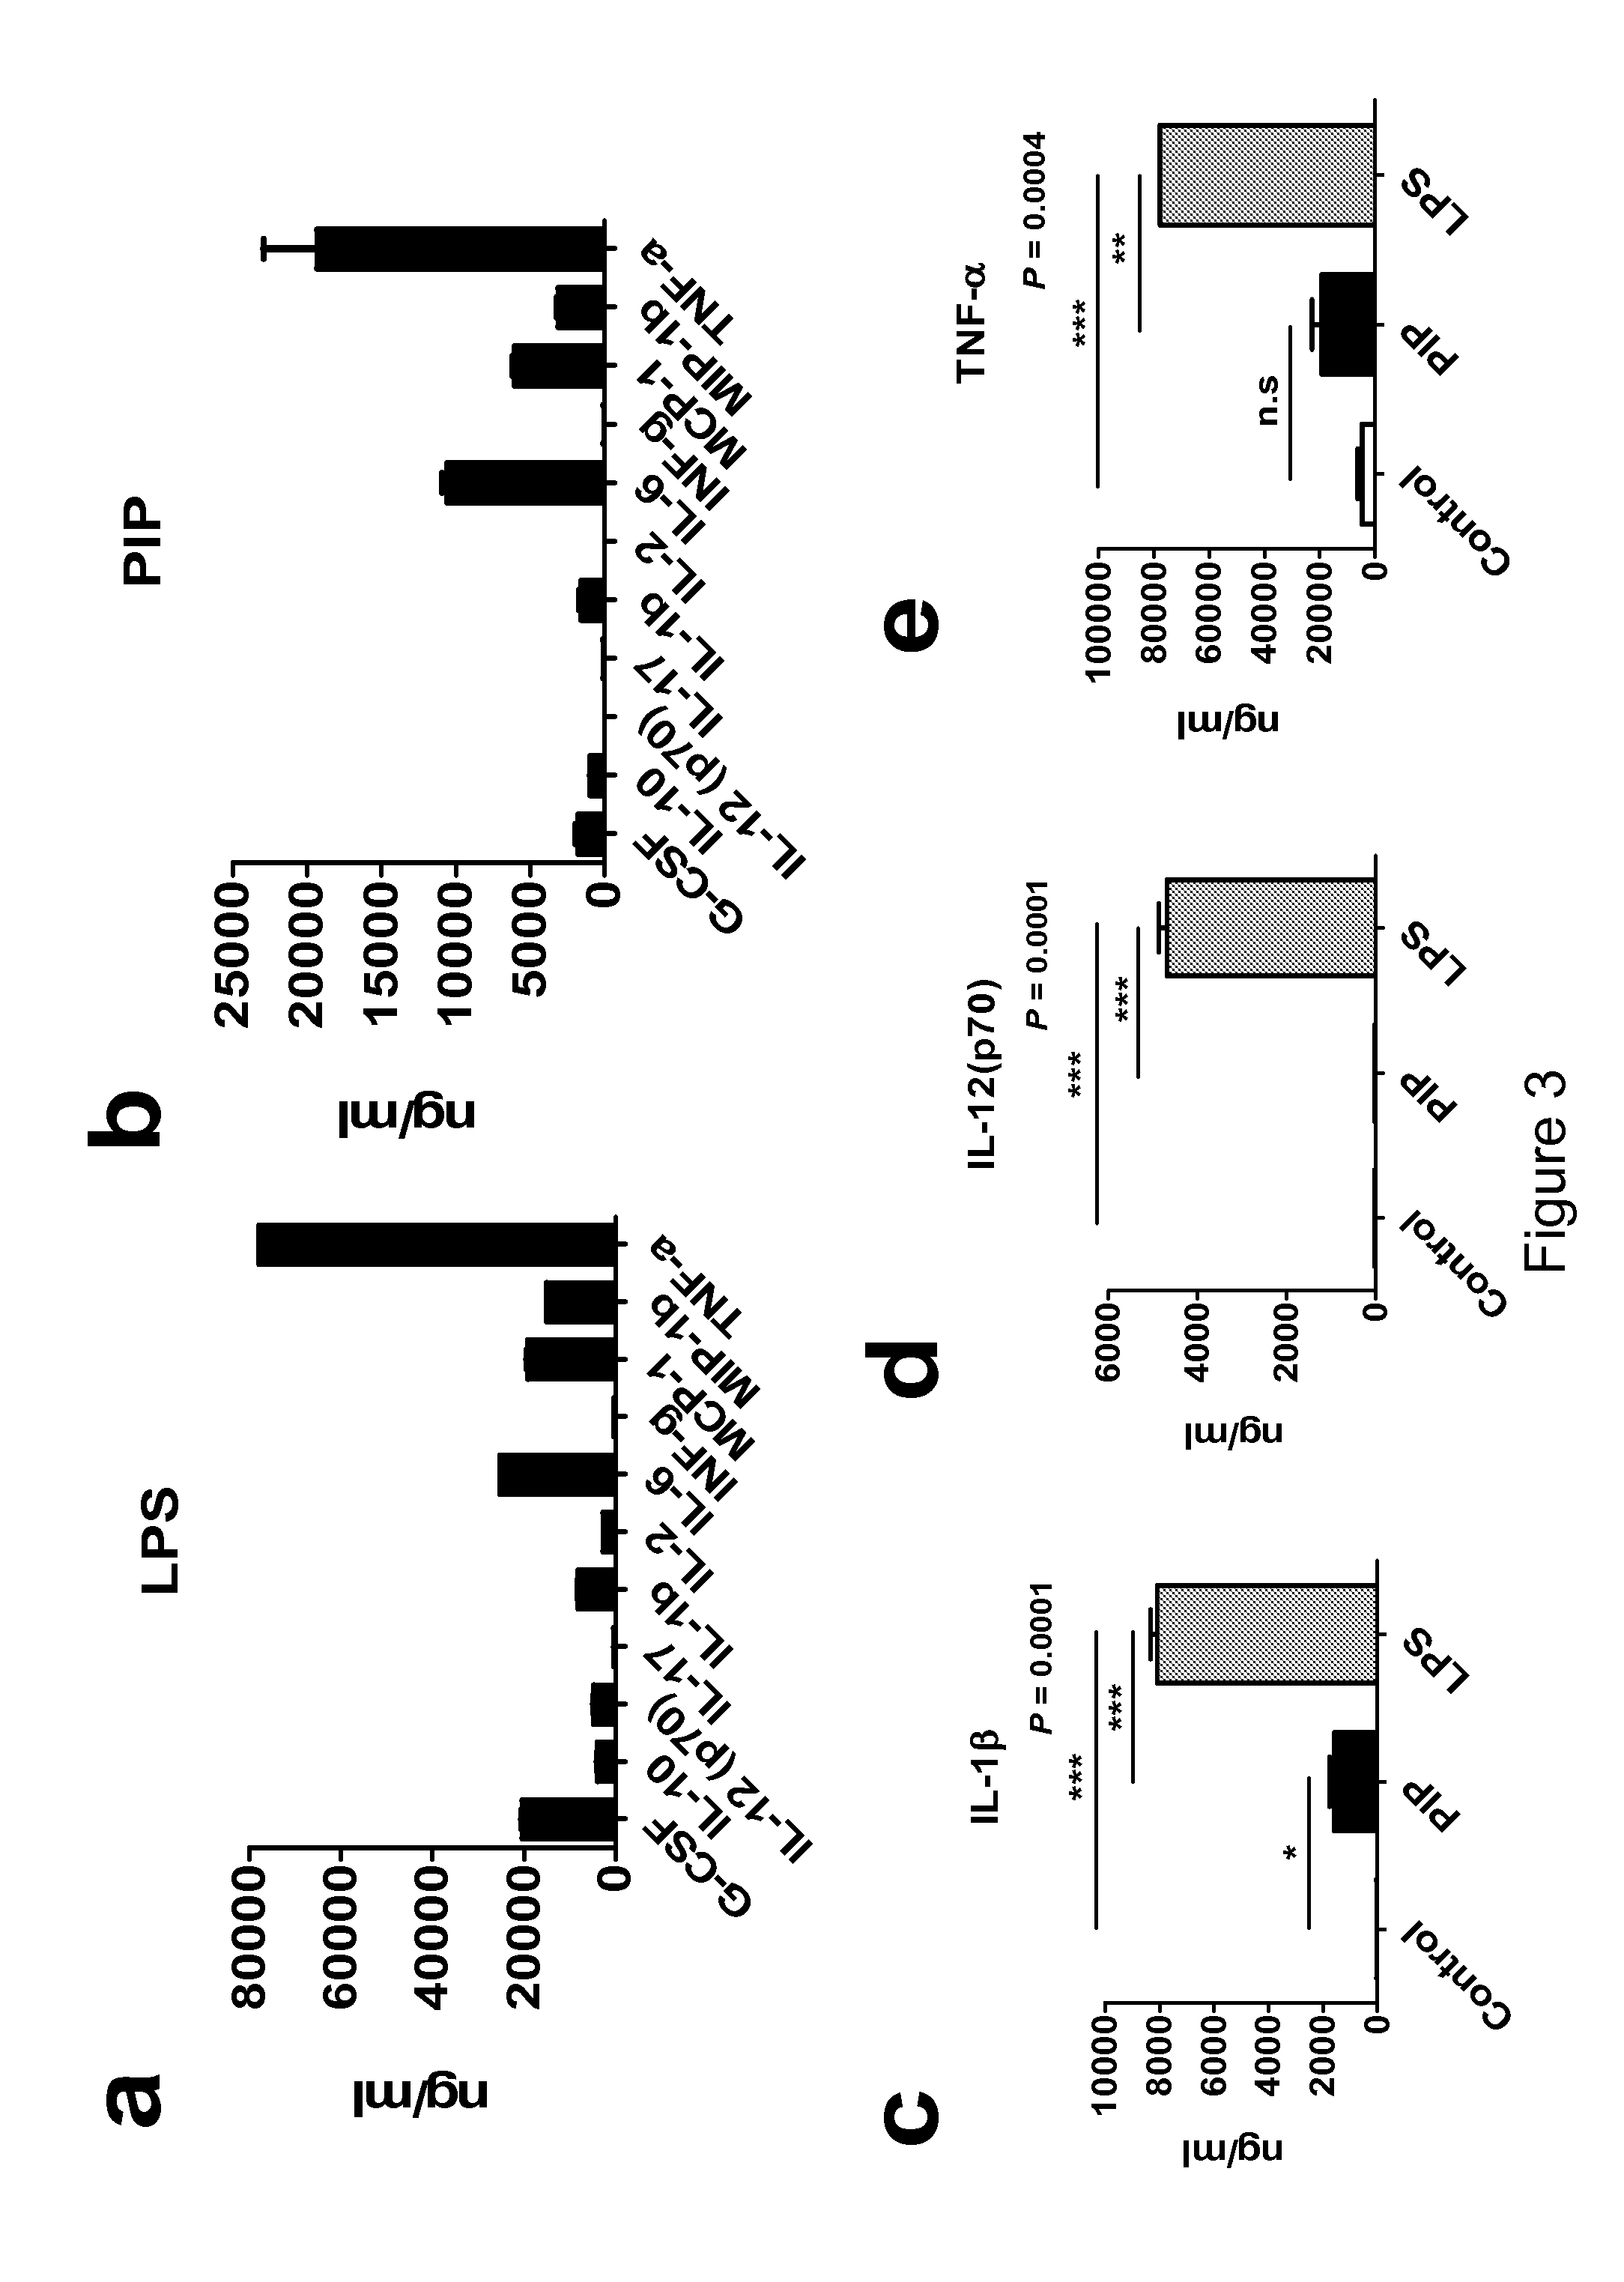 METHOD FOR GENERATION OF REGULATORY T-CELLS USING FACTORS SECRETED BY iNKT CELLS